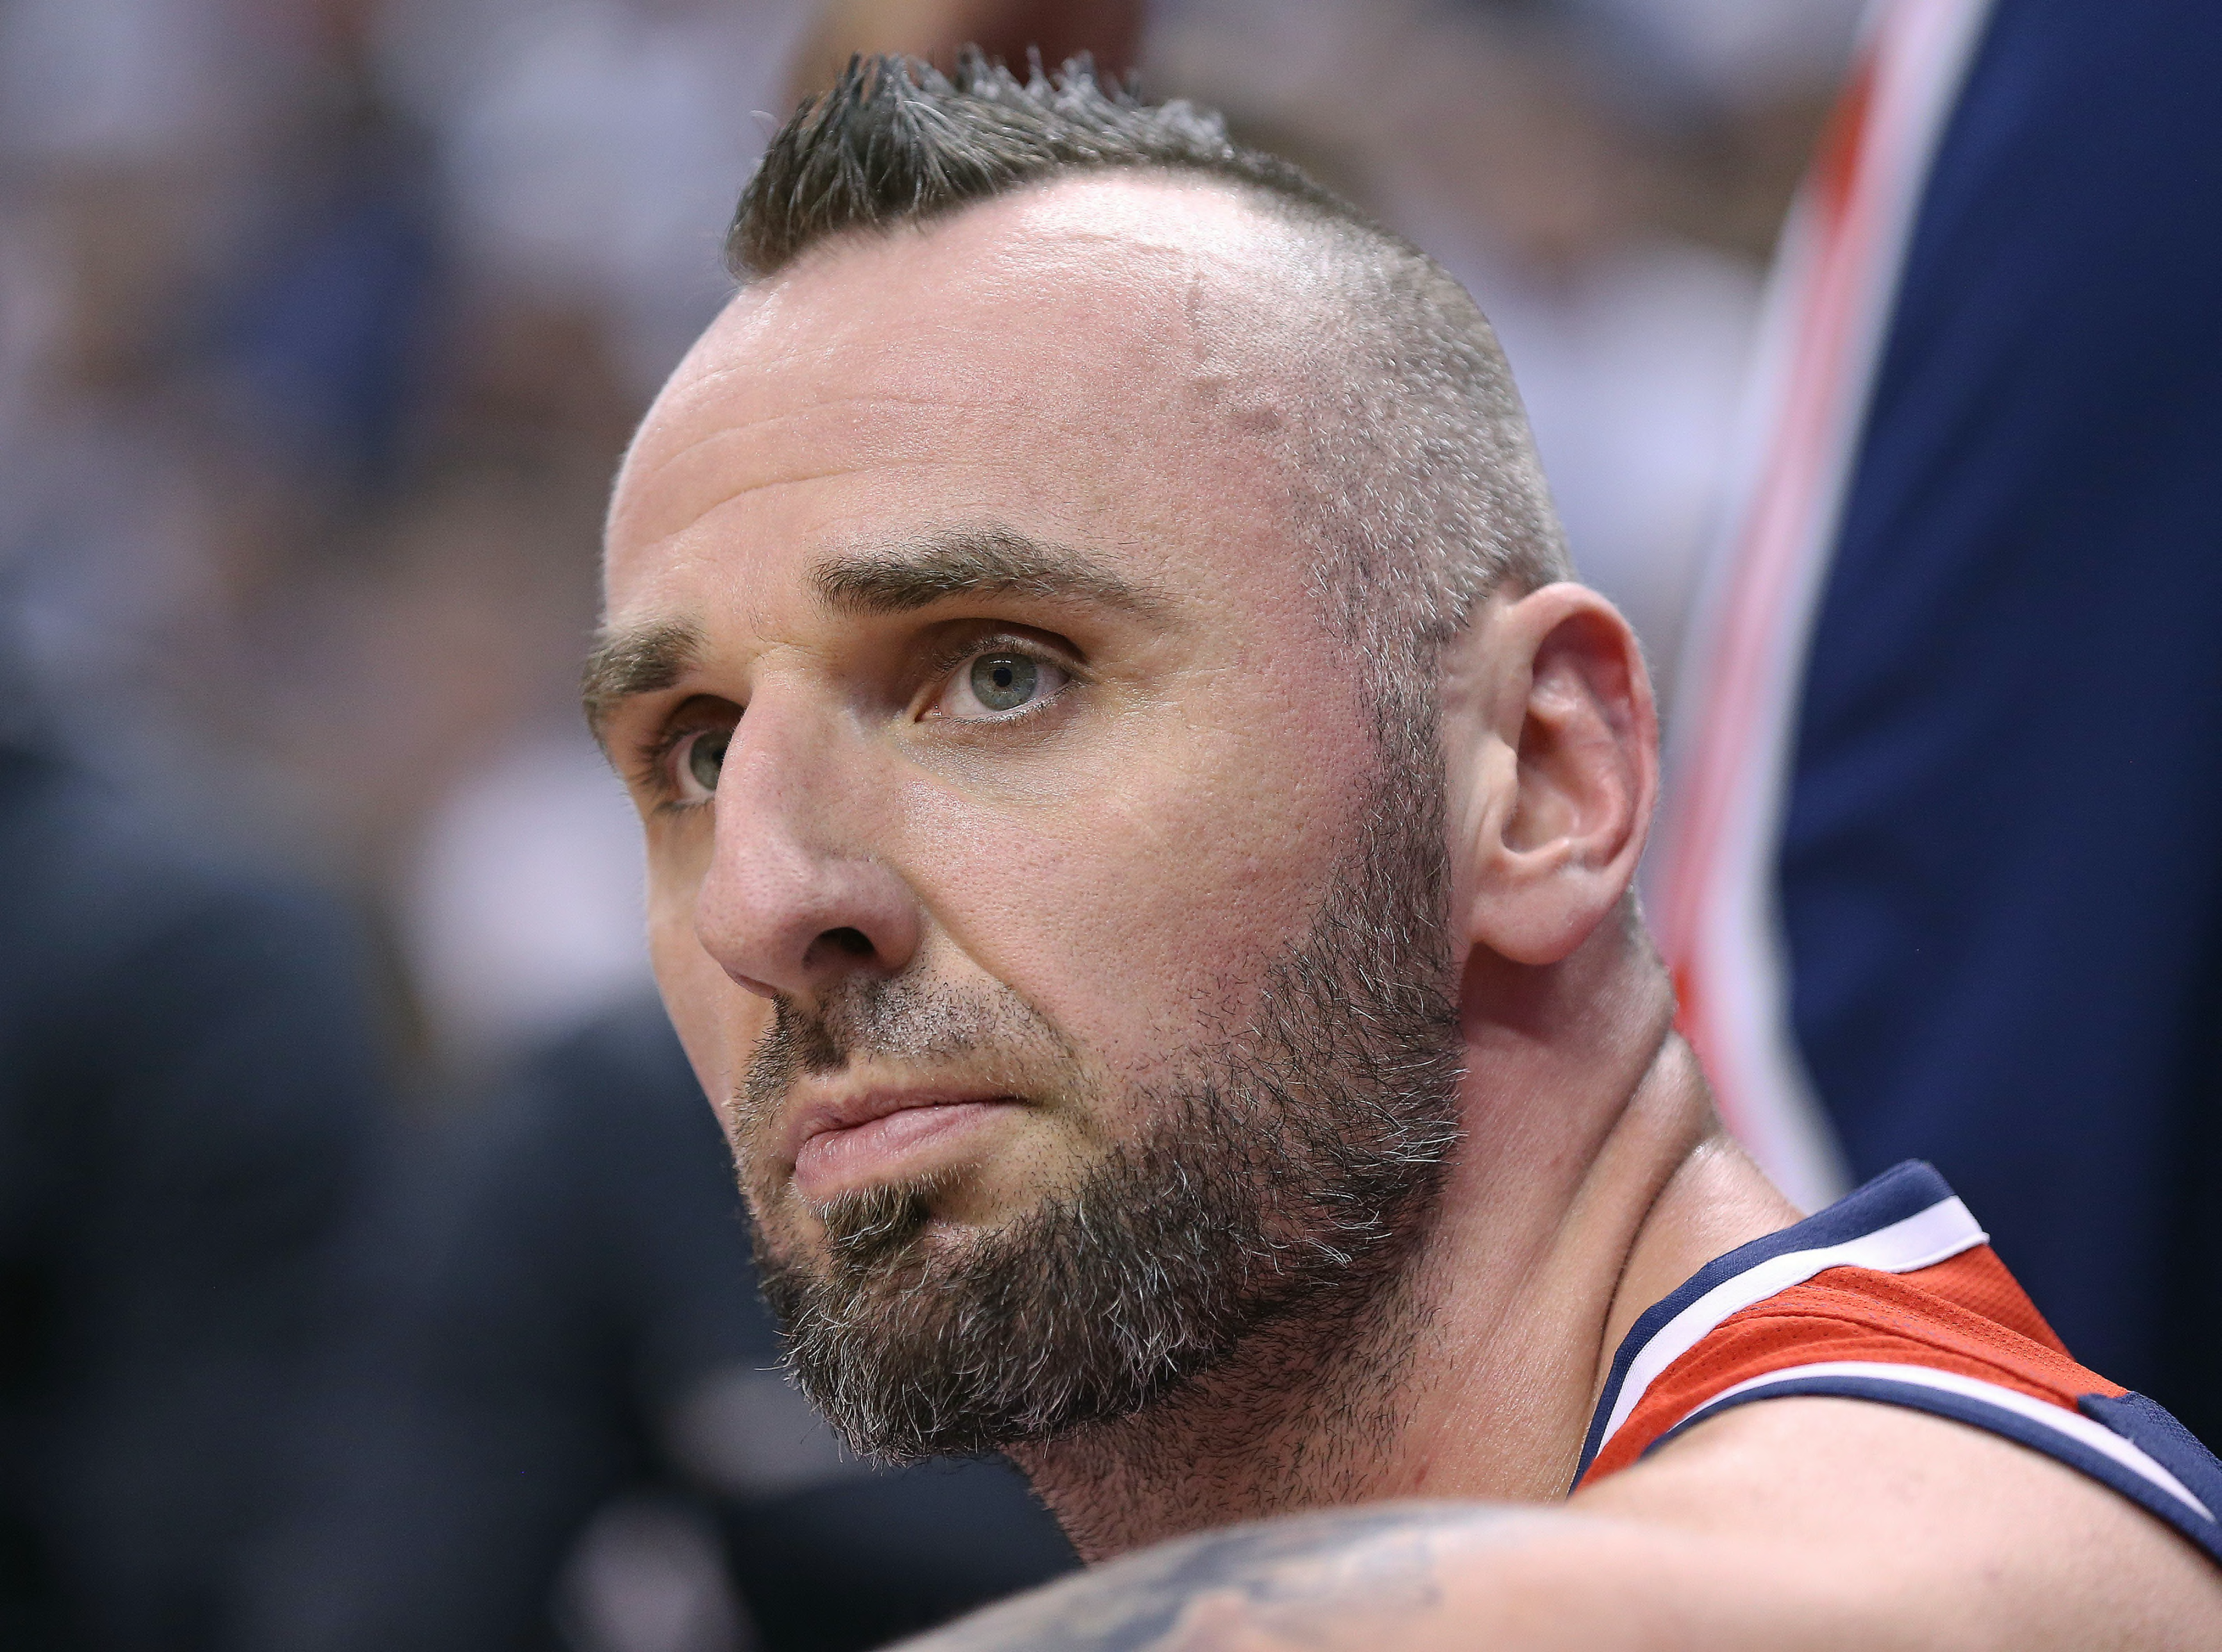 Wizards center Marcin Gortat's physicality is beautifully understated